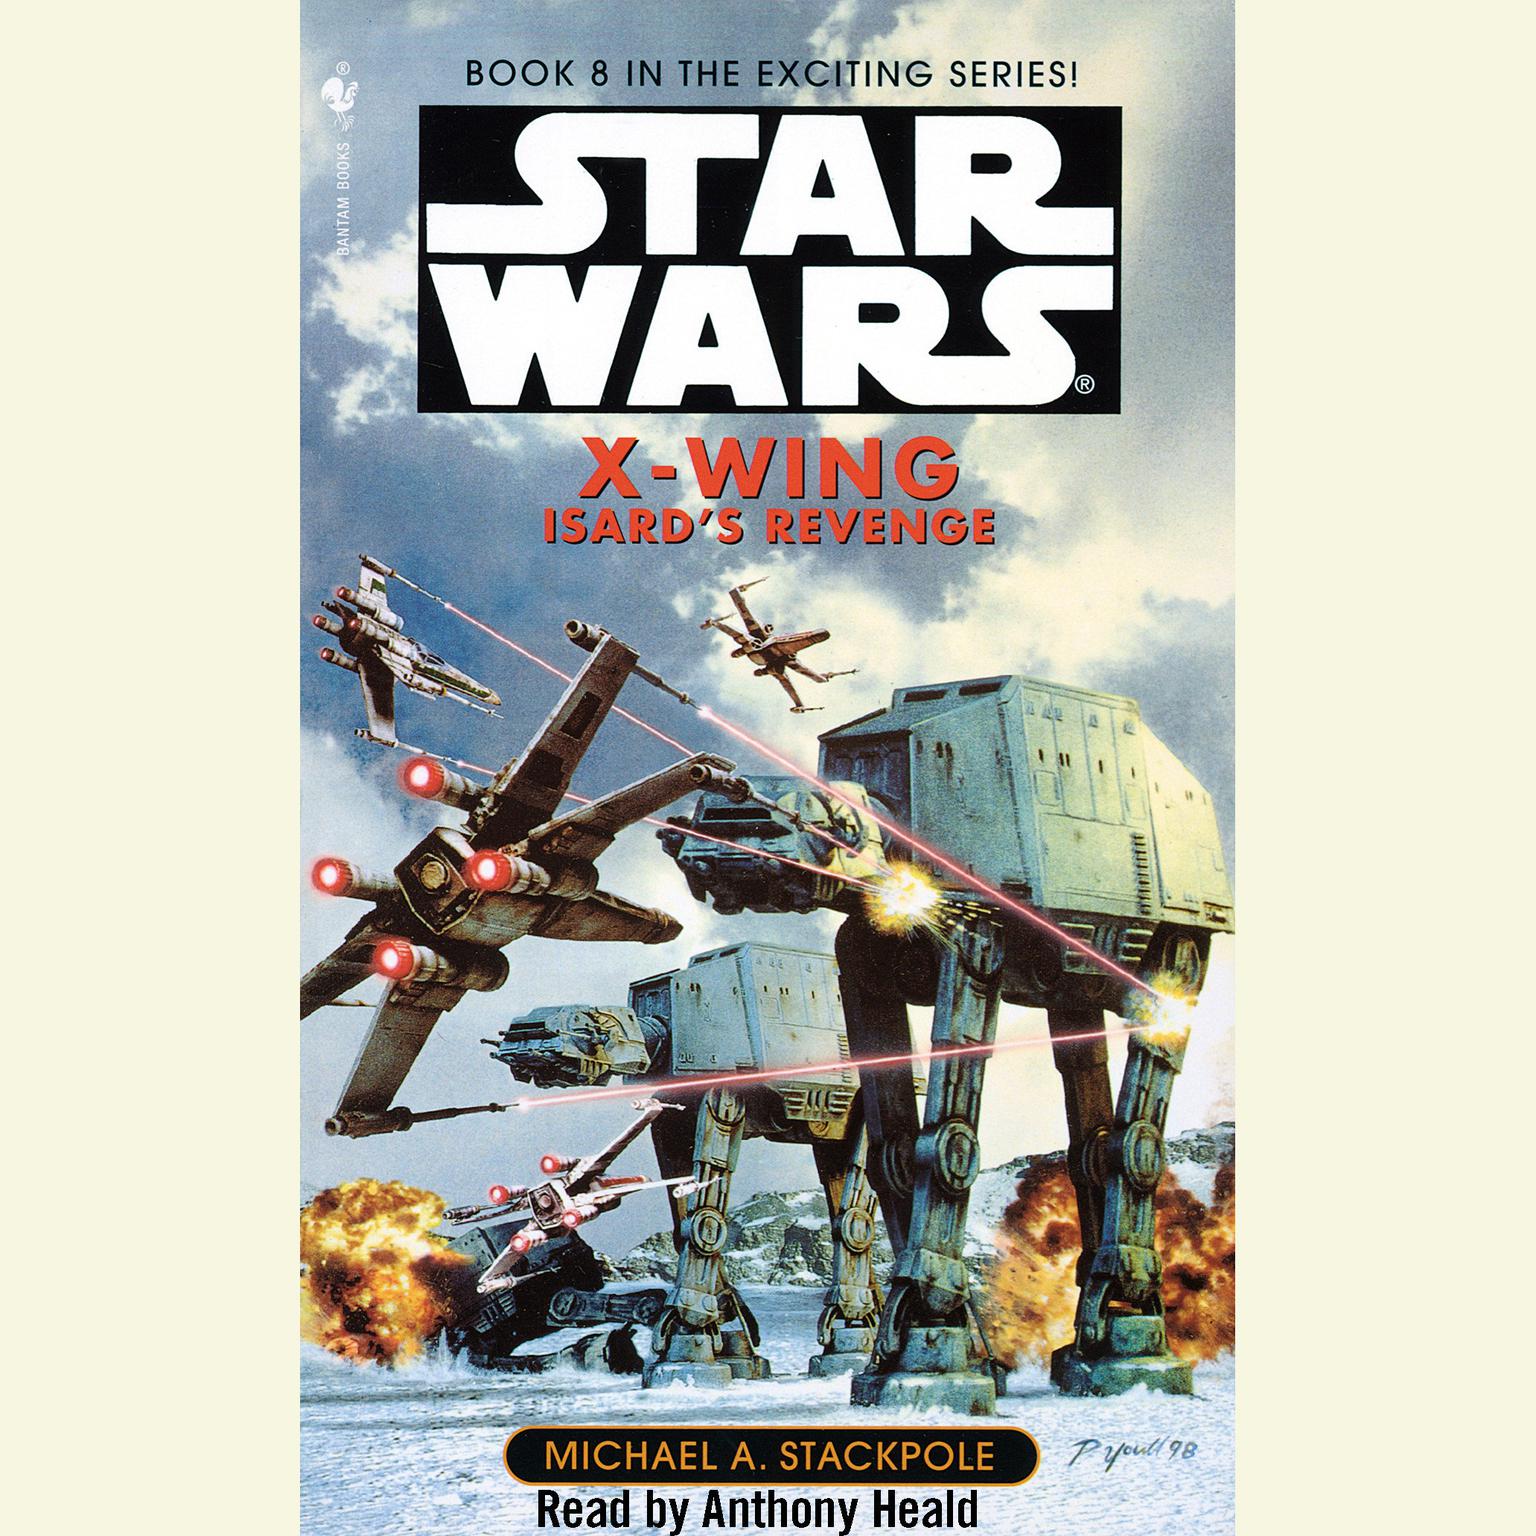 Star Wars: X-Wing: Isards Revenge (Abridged): Book 8 Audiobook, by Michael A. Stackpole